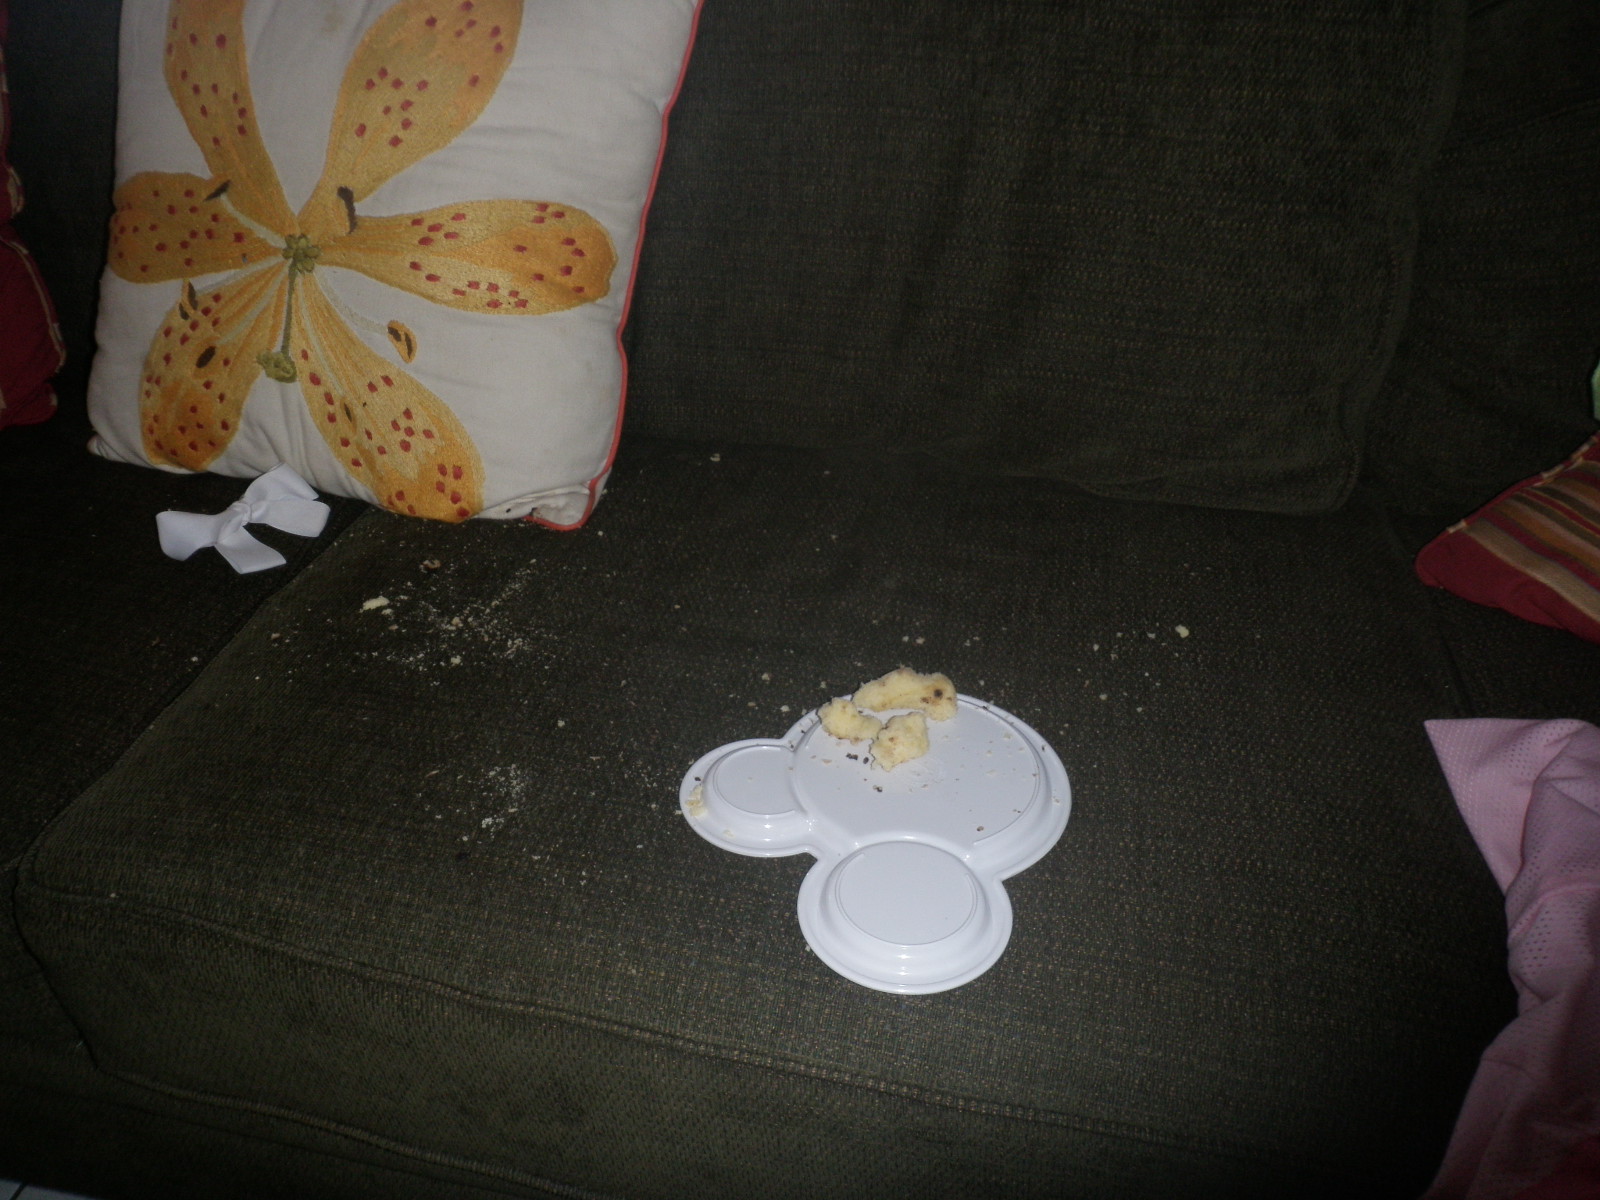 The way the donut crumbled…..and the way Smart Mama came to the rescue!